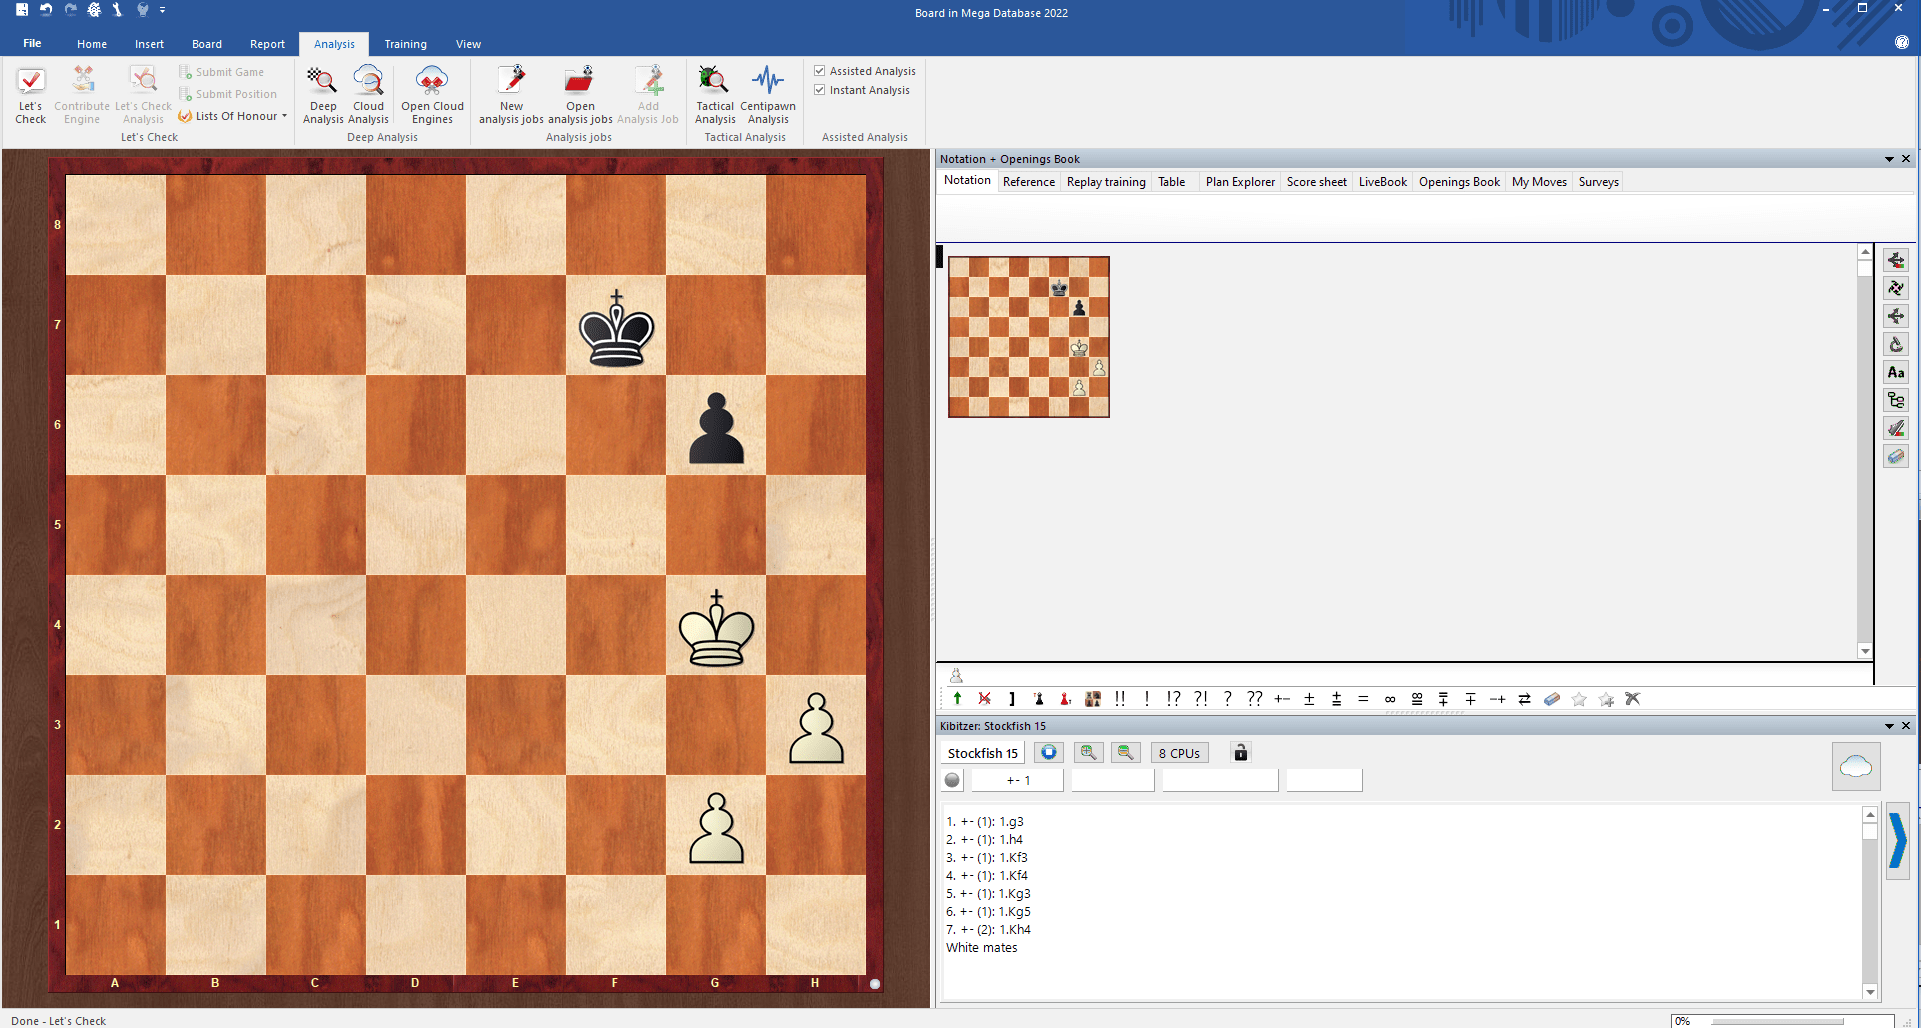 Chessbase 17 Don't find games : r/chess